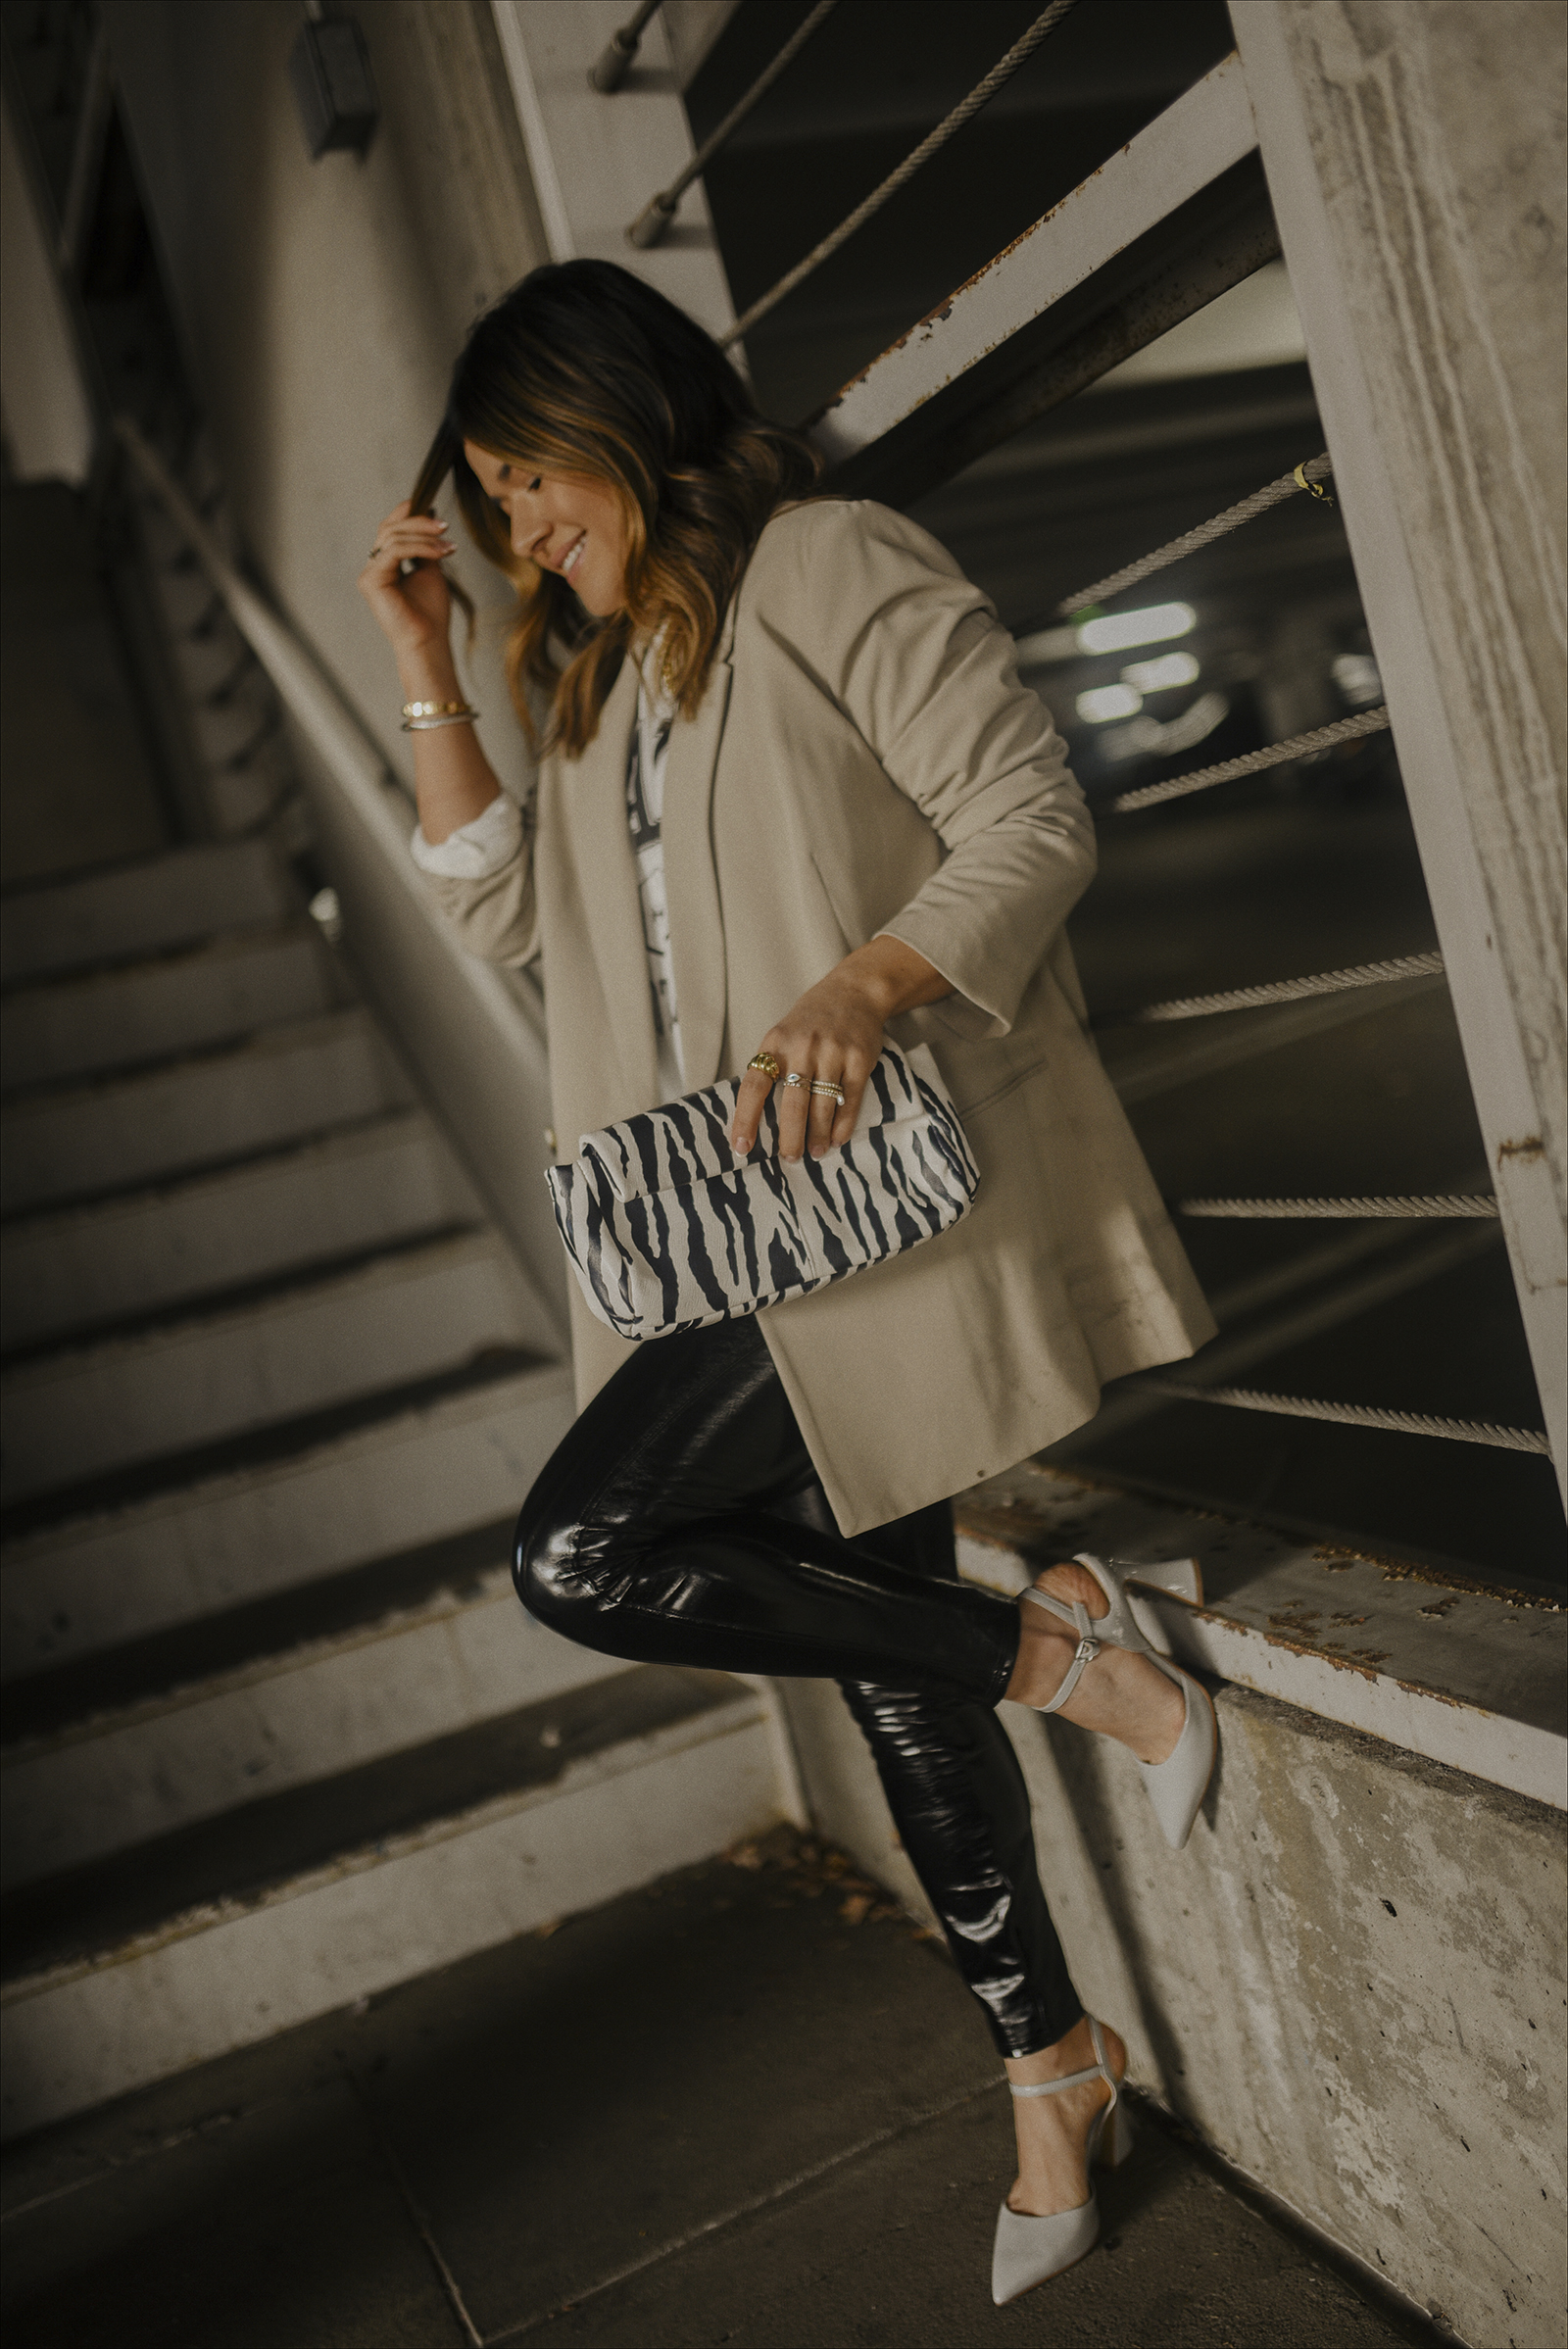 HOW TO STYLE YOUR LIQUID LEATHER PANTS, NYE OUTFIT IDEAS